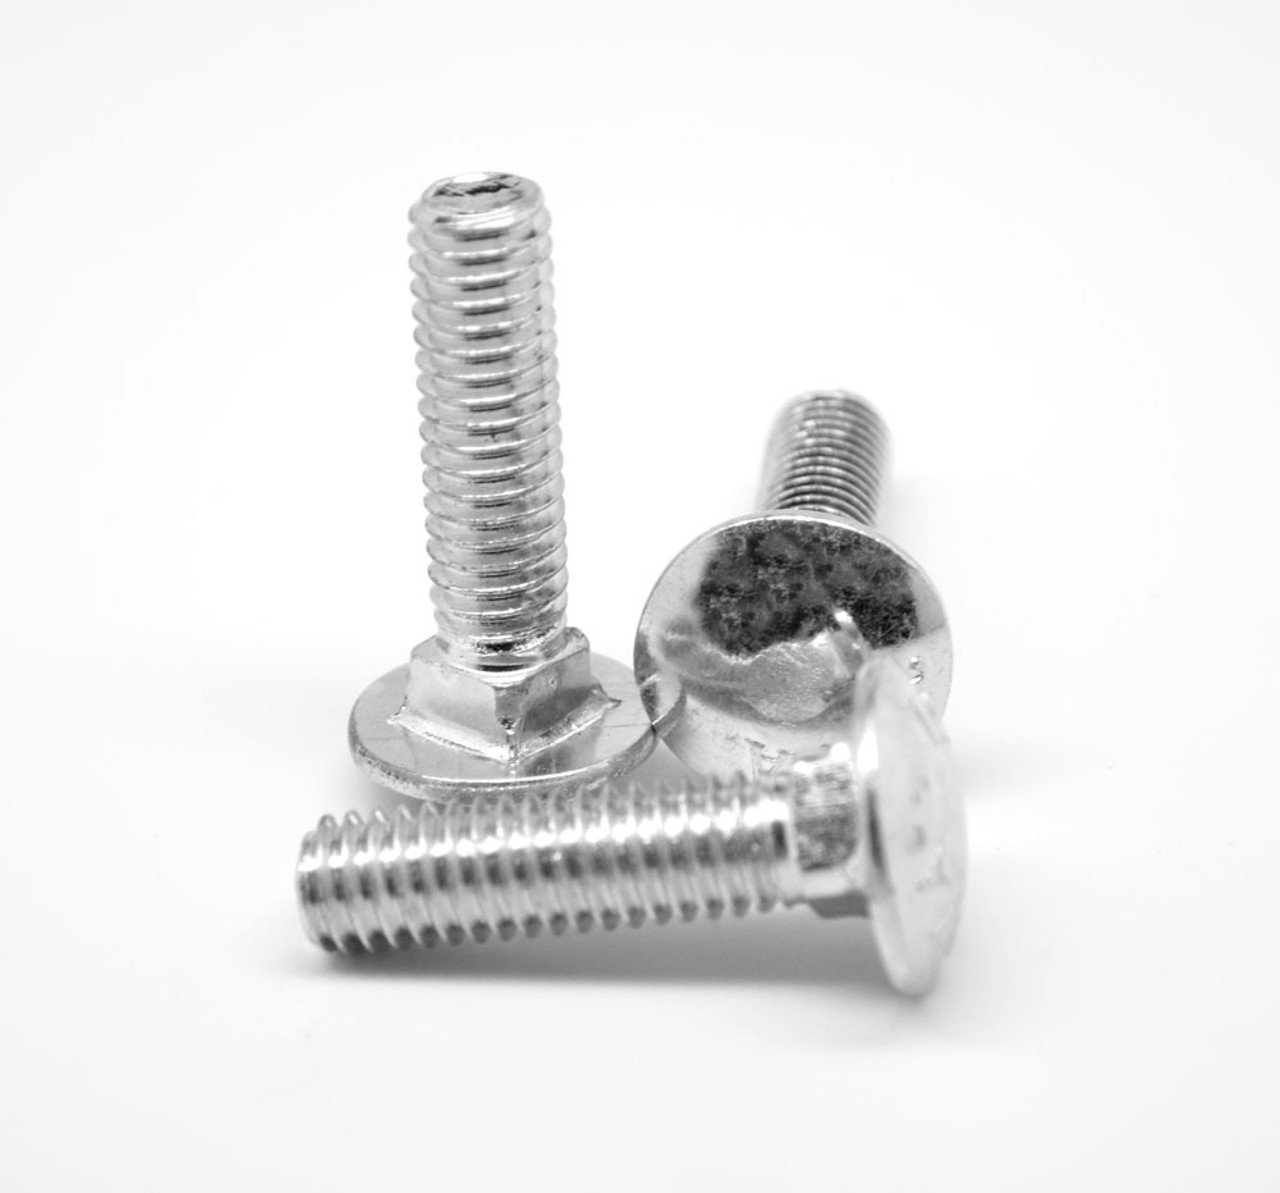 5/8"-11 x 3 1/2" (FT) Coarse Thread A307 Grade A Carriage Bolt Low Carbon Steel Zinc Plated